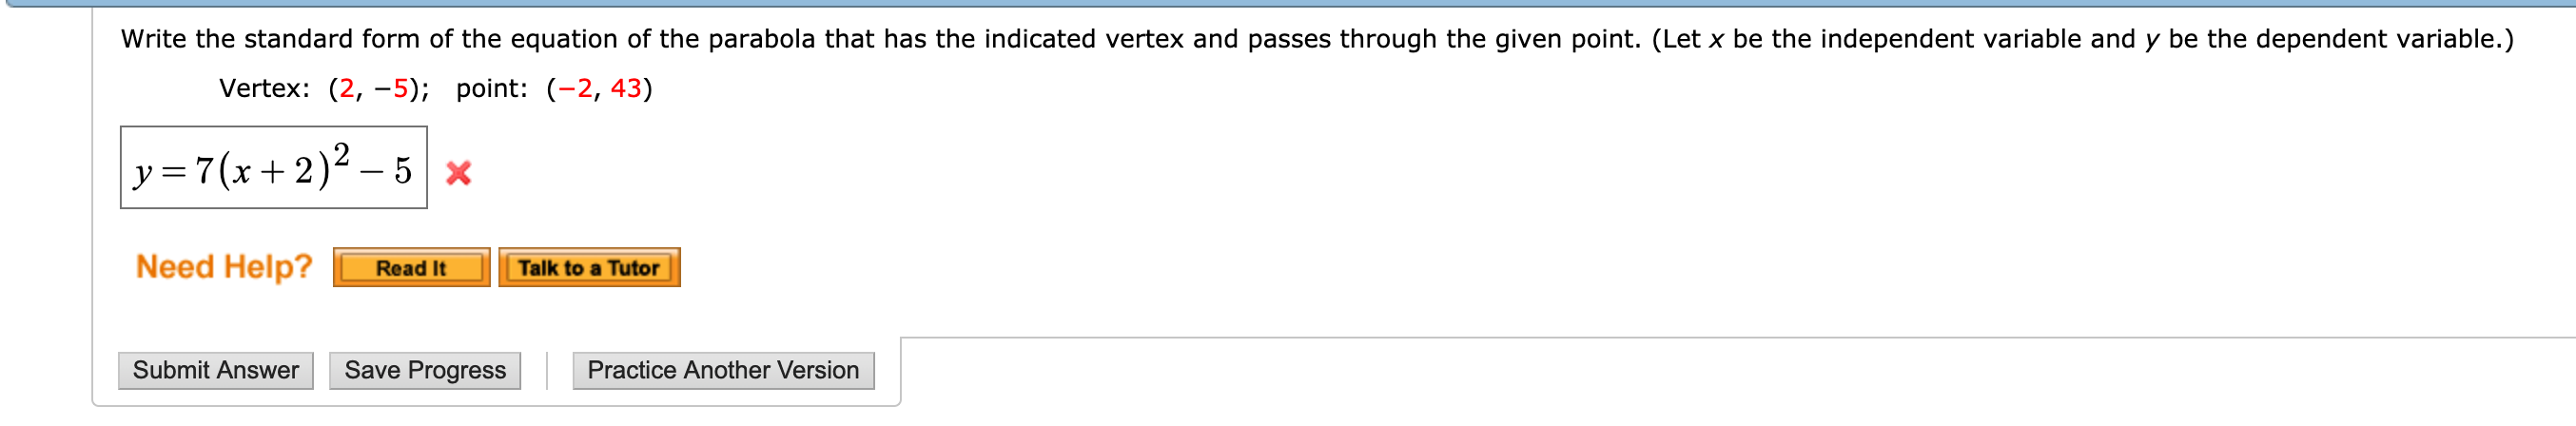 Write the standard form of the equation of the parabola that has the indicated vertex and passes through the given point. (Let x be the independent variable and y be the dependent variable.)
Vertex: (2,-5); point: (-2, 43)
Need Help?
Read ItTalk to a Tutor
Submit Answer Save Progress Practice Another Version
